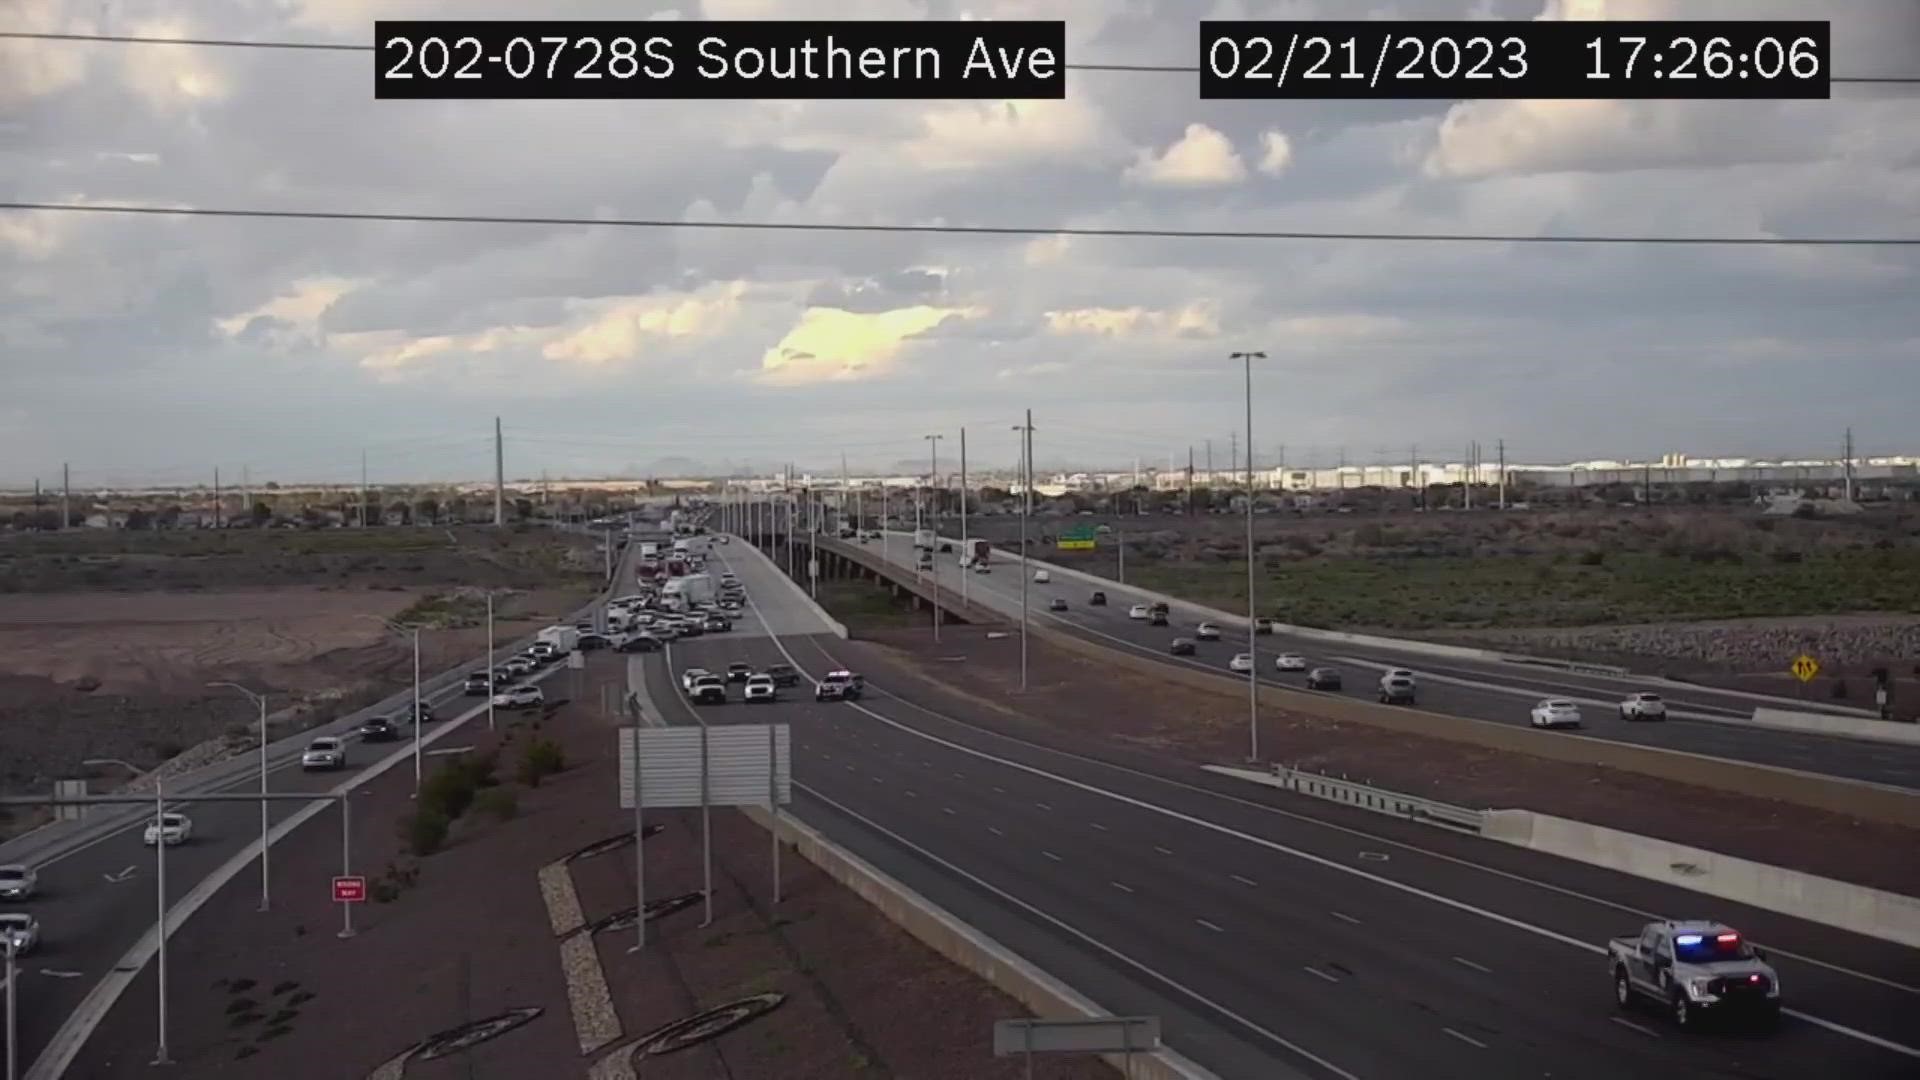 Authorities said a deadly crash involving one vehicle happened on Loop 202 near Southern Avenue.